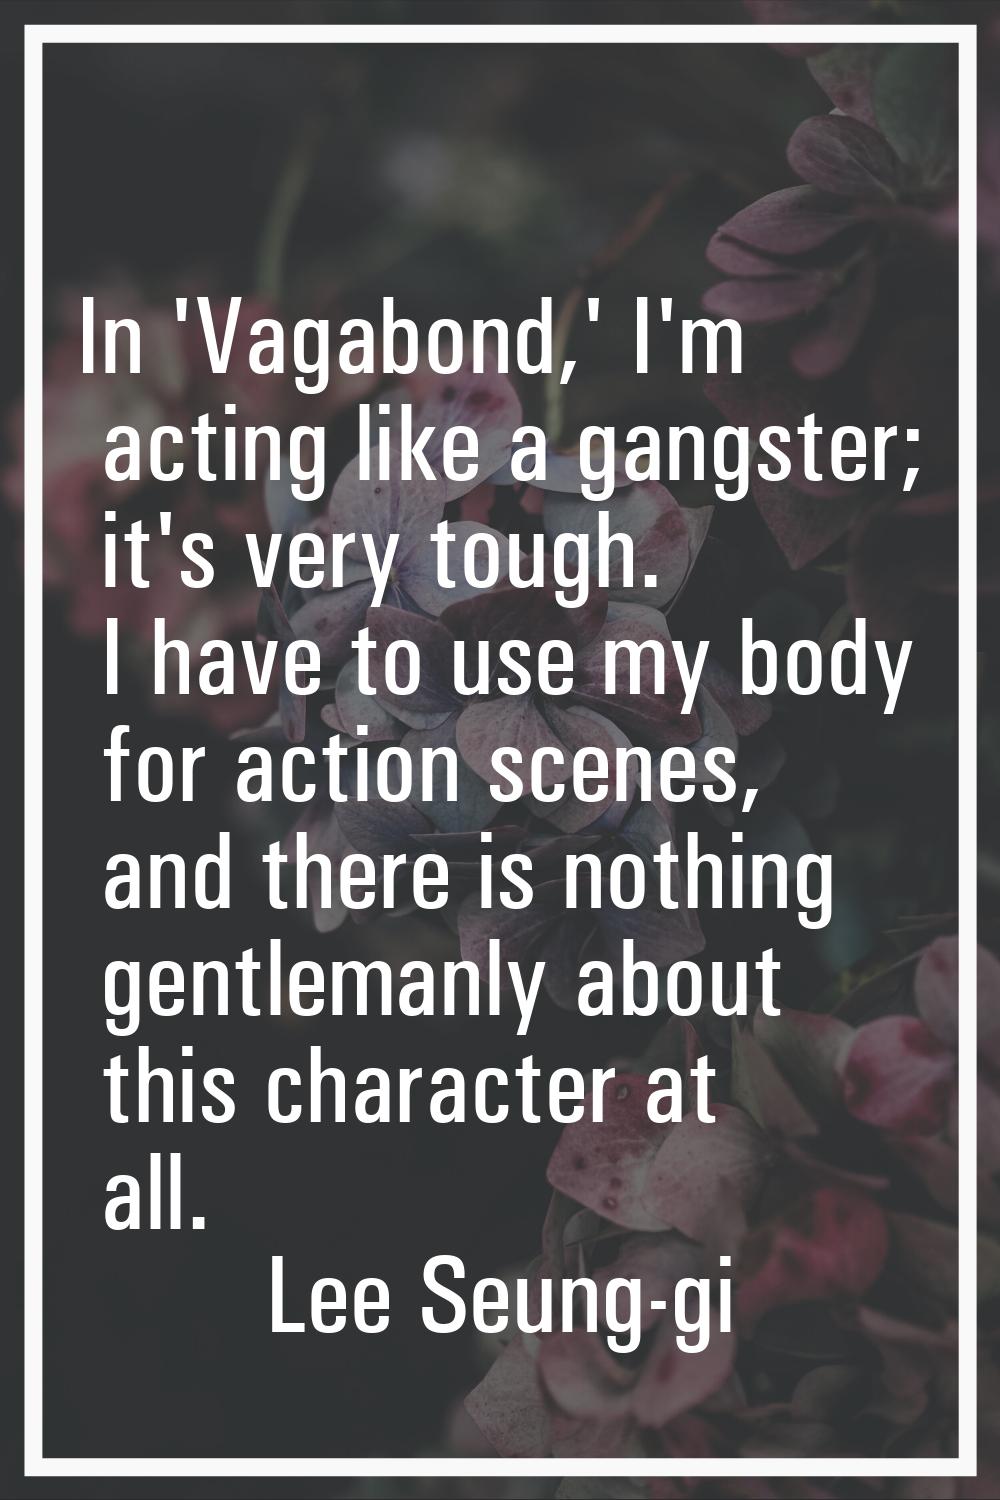 In 'Vagabond,' I'm acting like a gangster; it's very tough. I have to use my body for action scenes